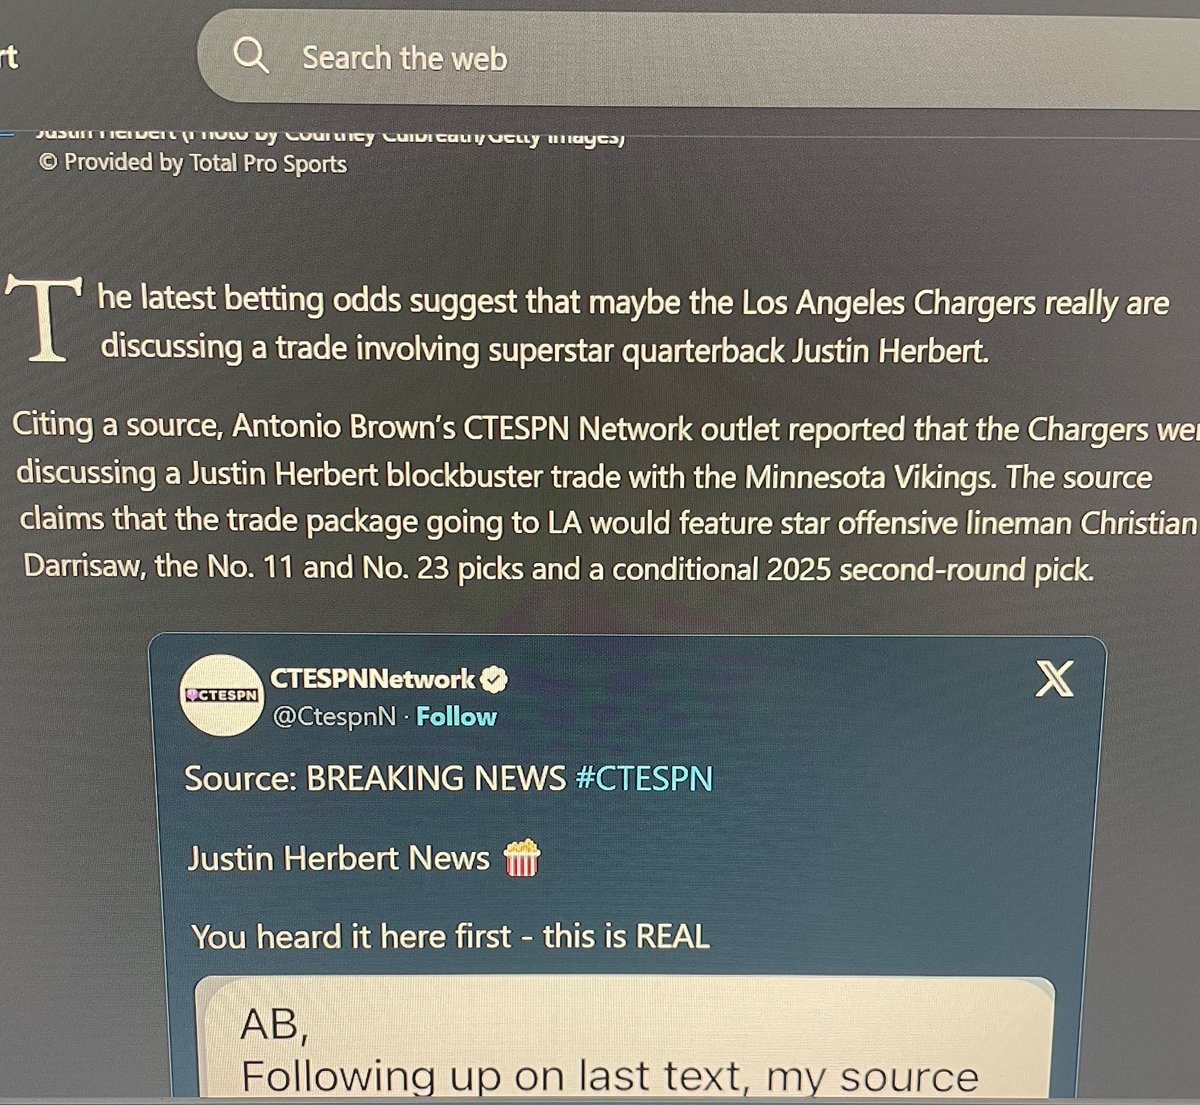 Using CTESPN as a source for a real NFL news article I’m crying